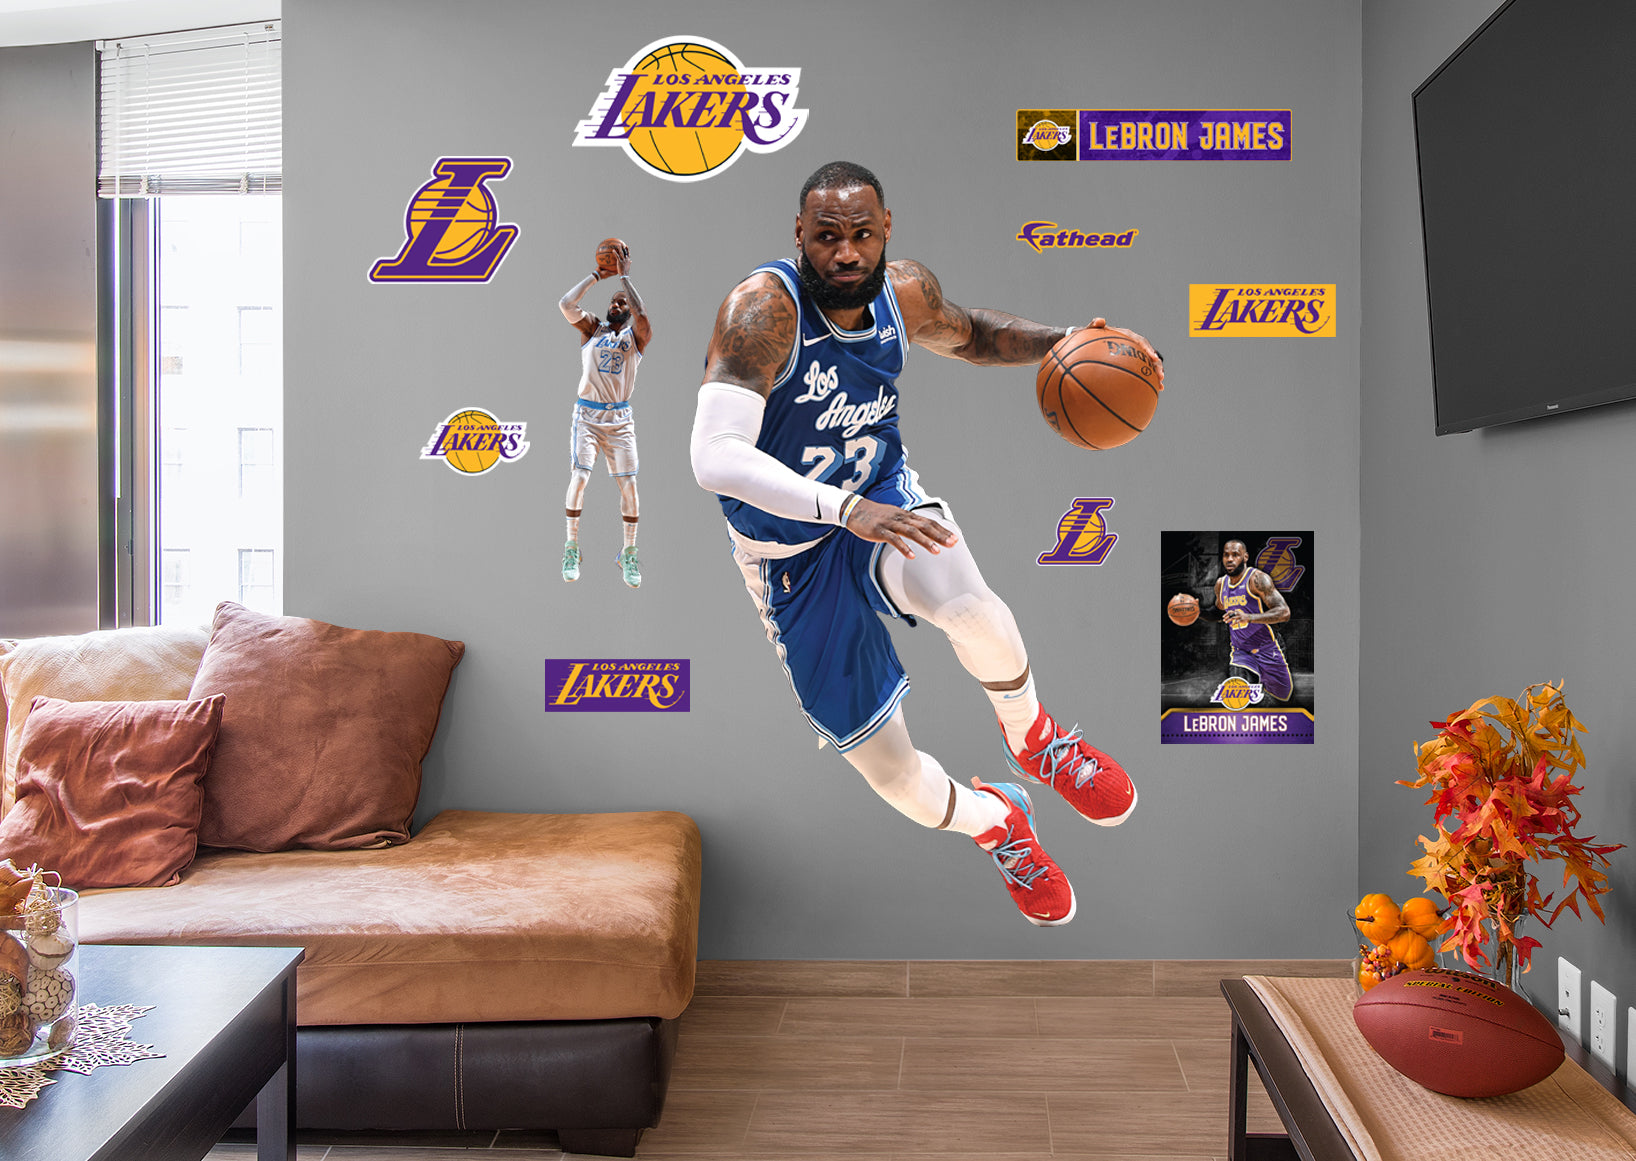 LeBron James 2021 Blue Jersey - Officially Licensed NBA Removable Wall Decal